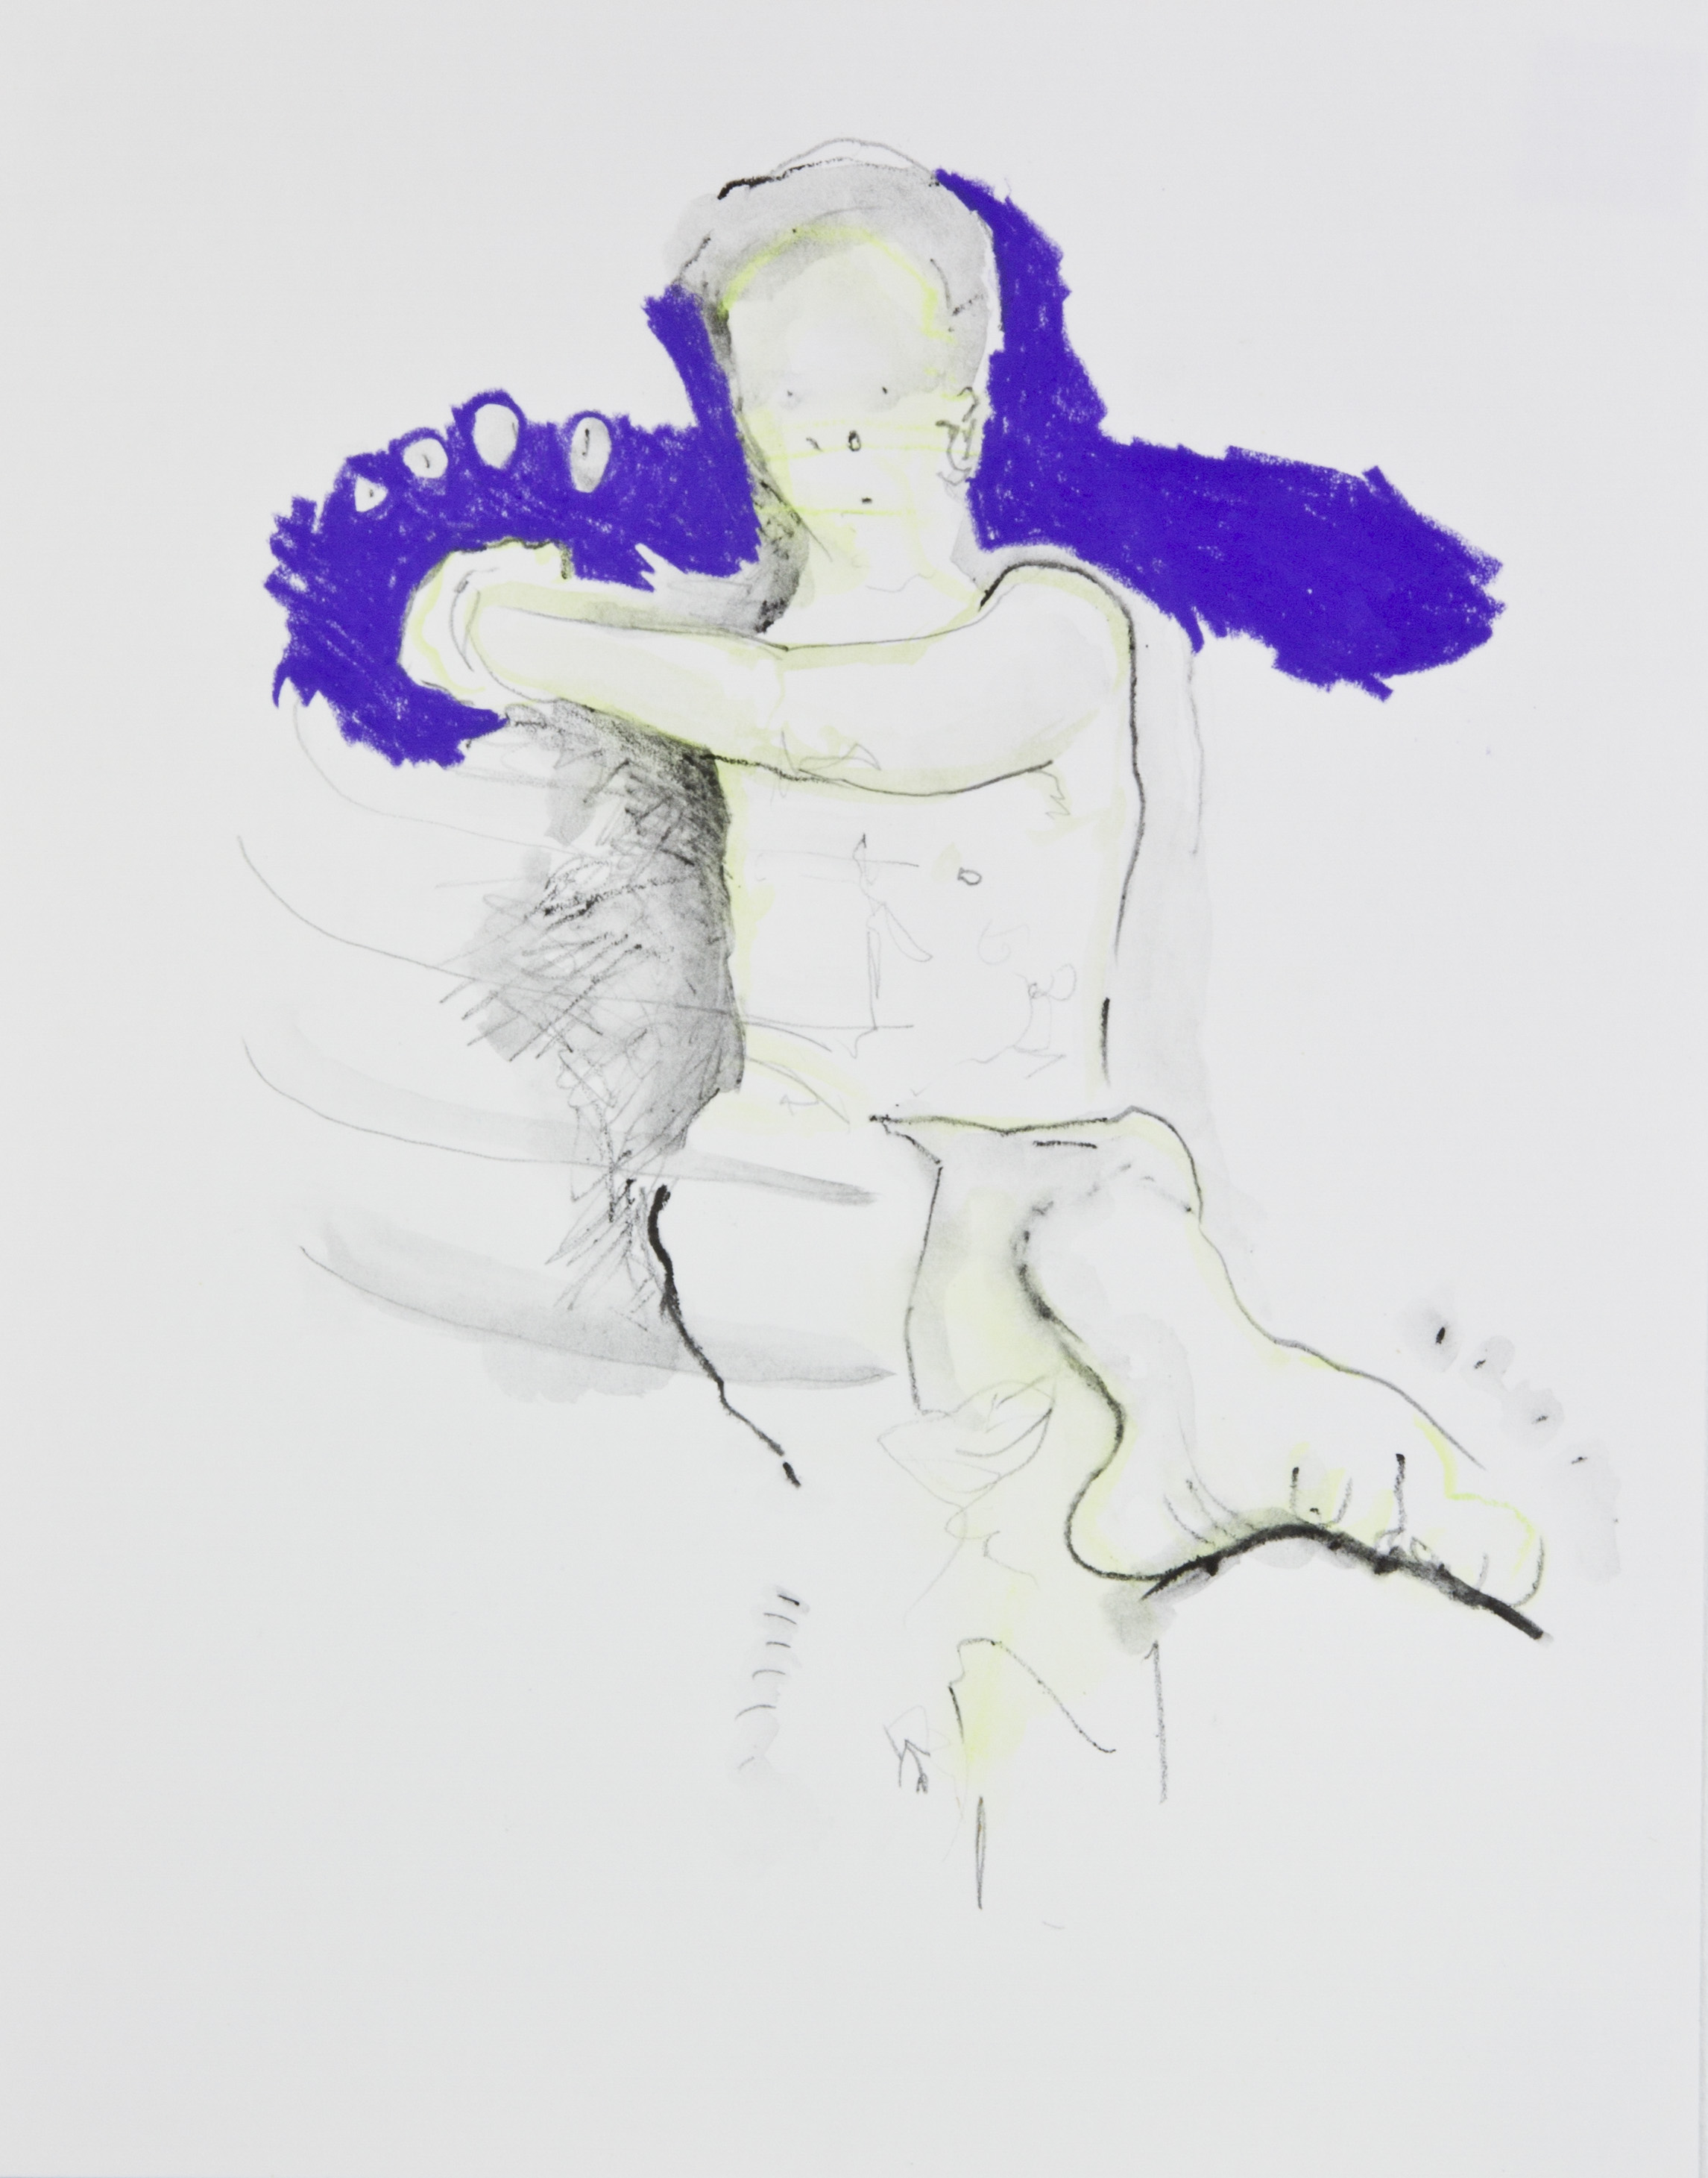 Purple Can Can, 2013, graphite, crayon and watercolor pencil on paper, 11x14 inches